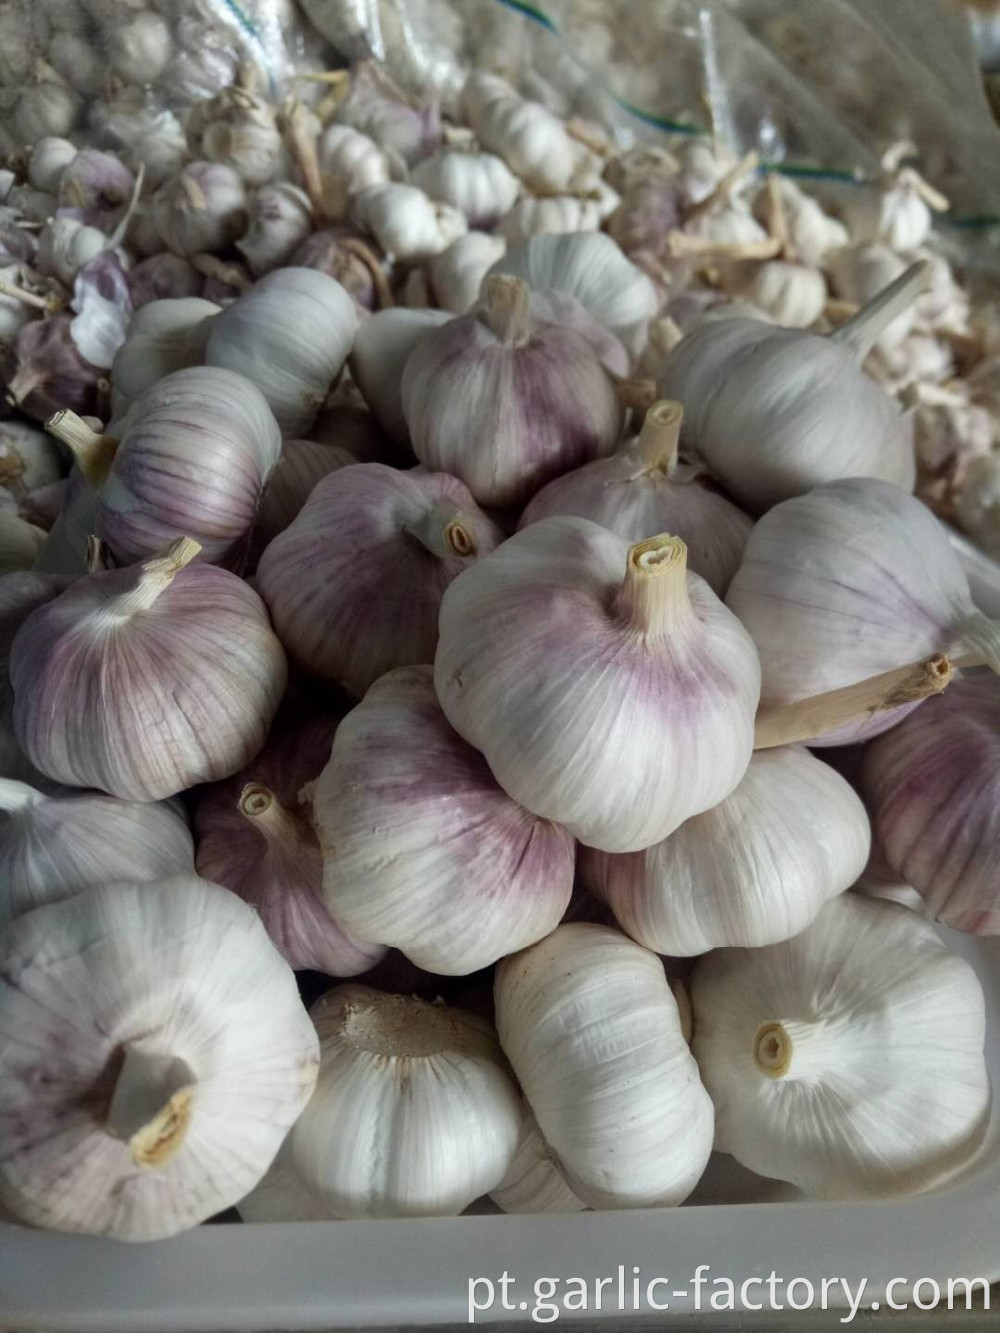 The cheapest and The smallest of garlic